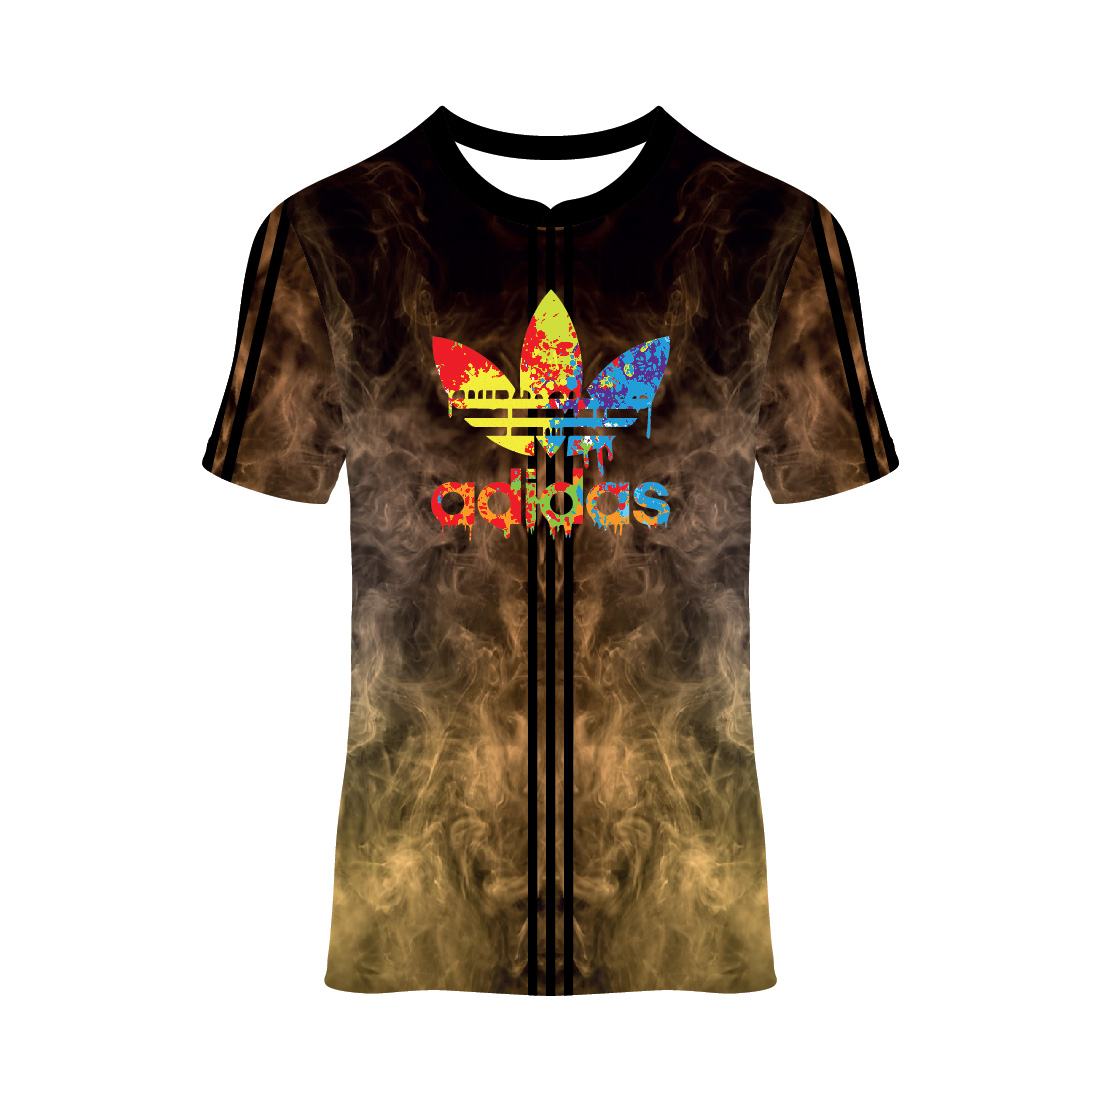 Prints of adidas front images.